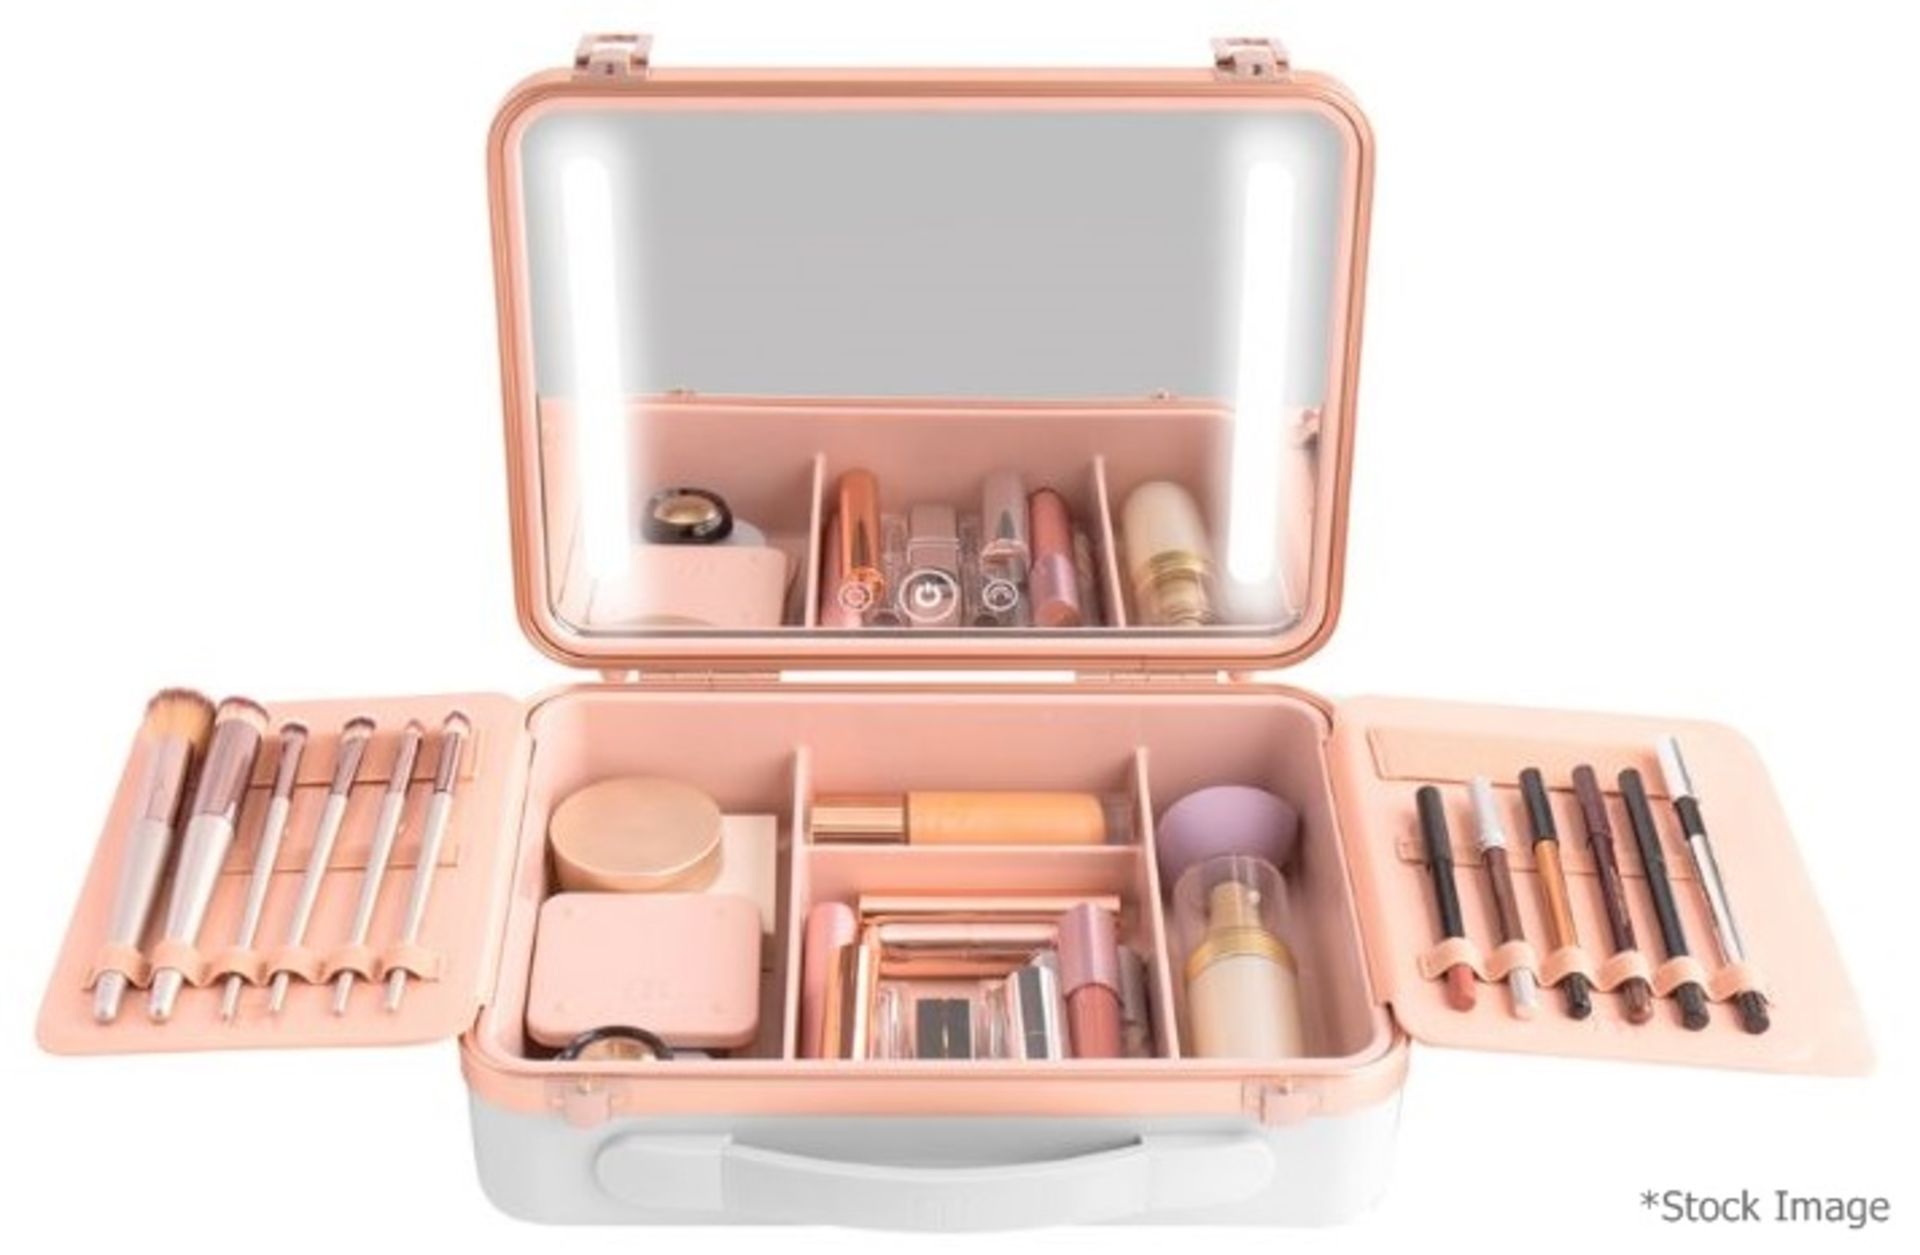 1 x BEAUTIFECT 'Beautifect Box' Make-Up Carry Case With Built-in Illuminated Mirror - RRP £279.00